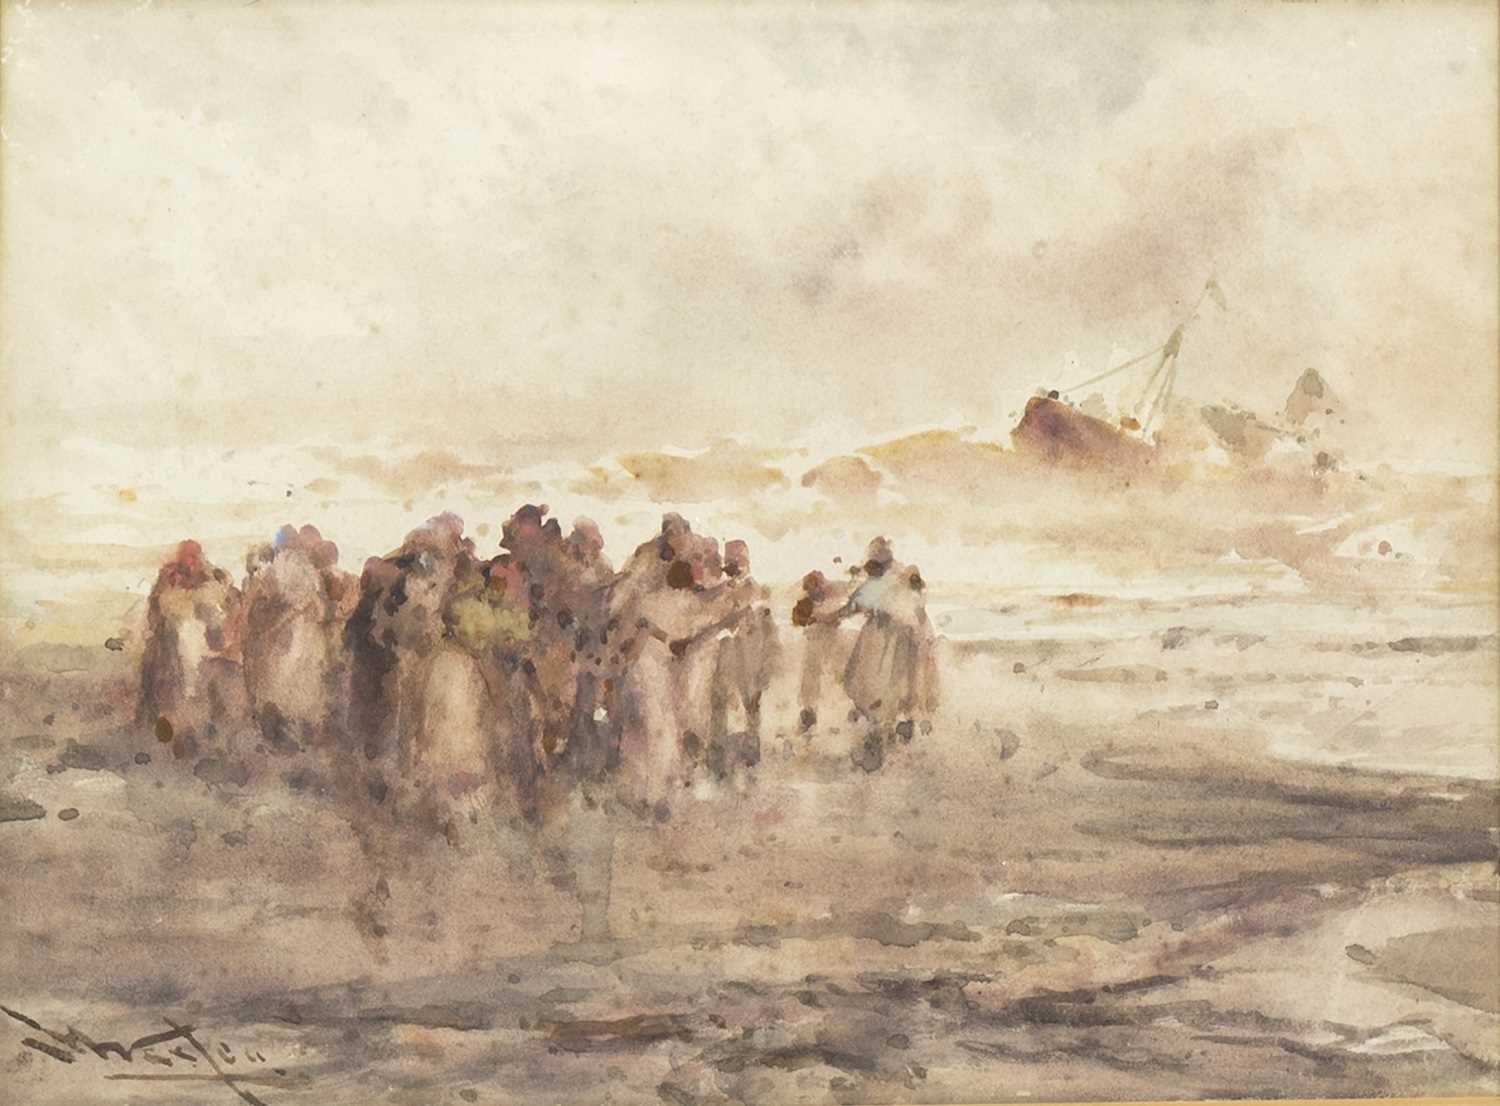 Lot 618 - FIGURES ON THE SHORE, A WATERCOLOUR BY FRANK WASLEY